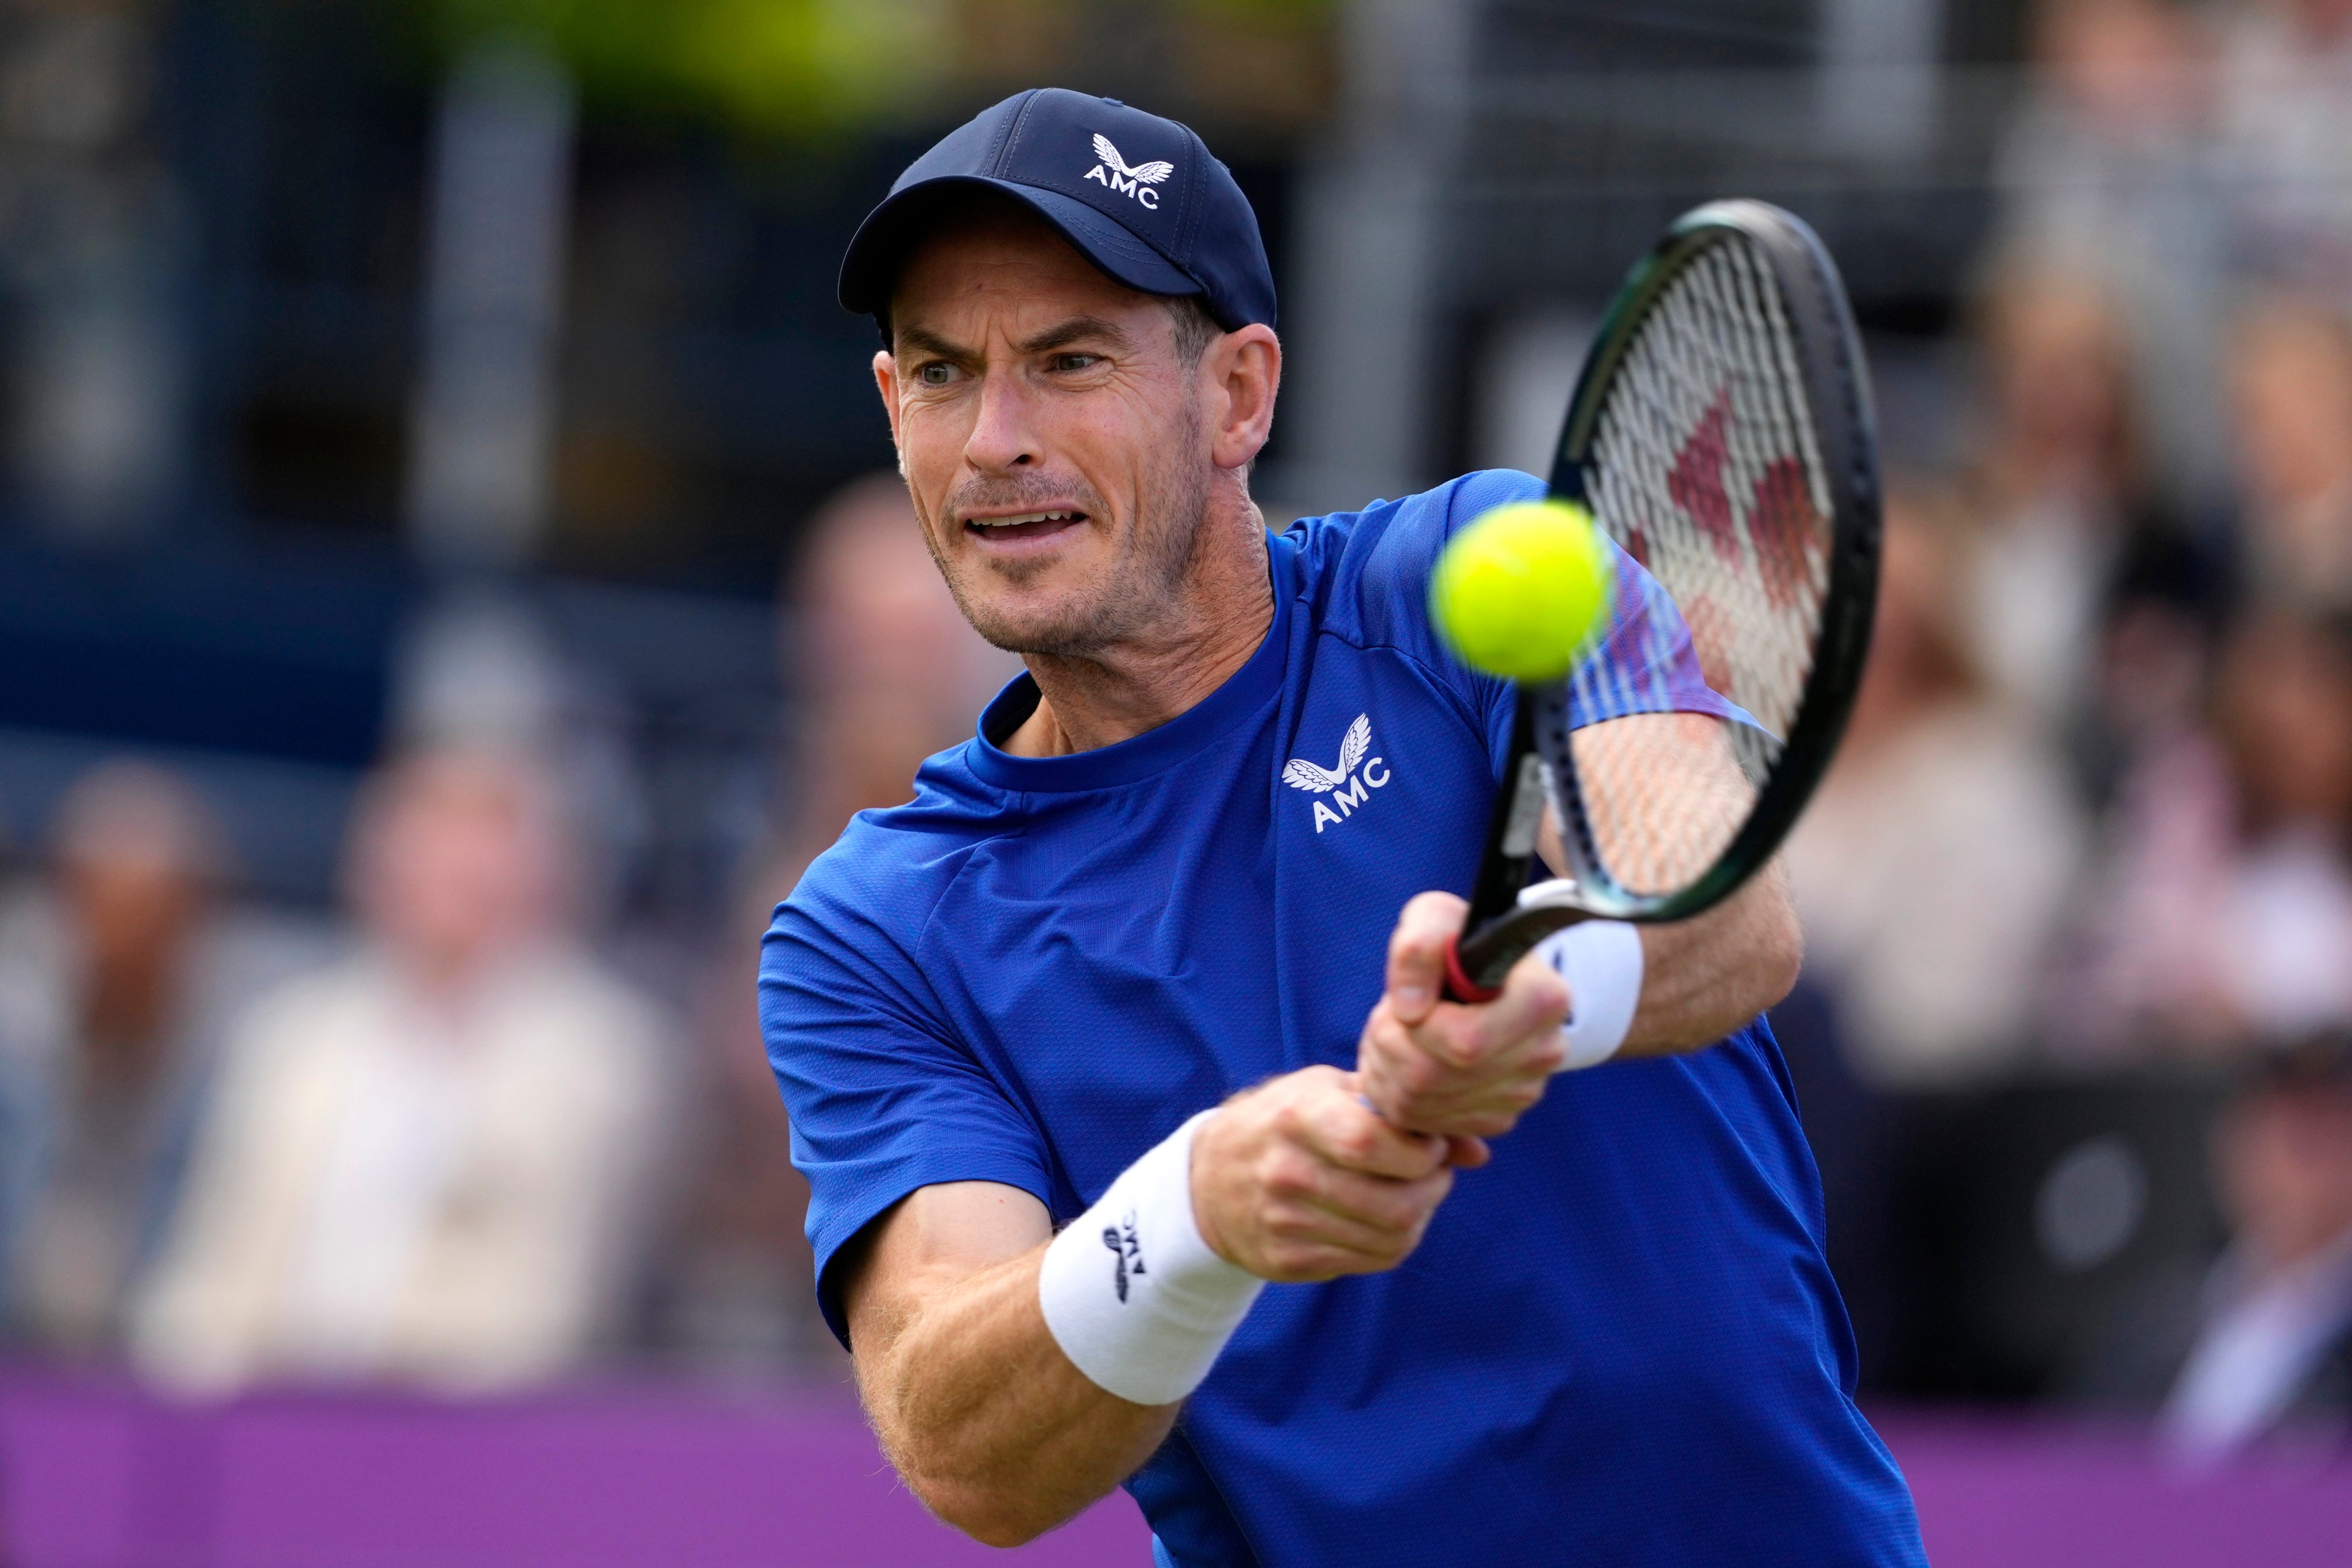 Scotland’s Andy Murray, who is recovering from back surgery, will open what is expected to be his final Wimbledon against Czech Tomas Machac. Photo: AP